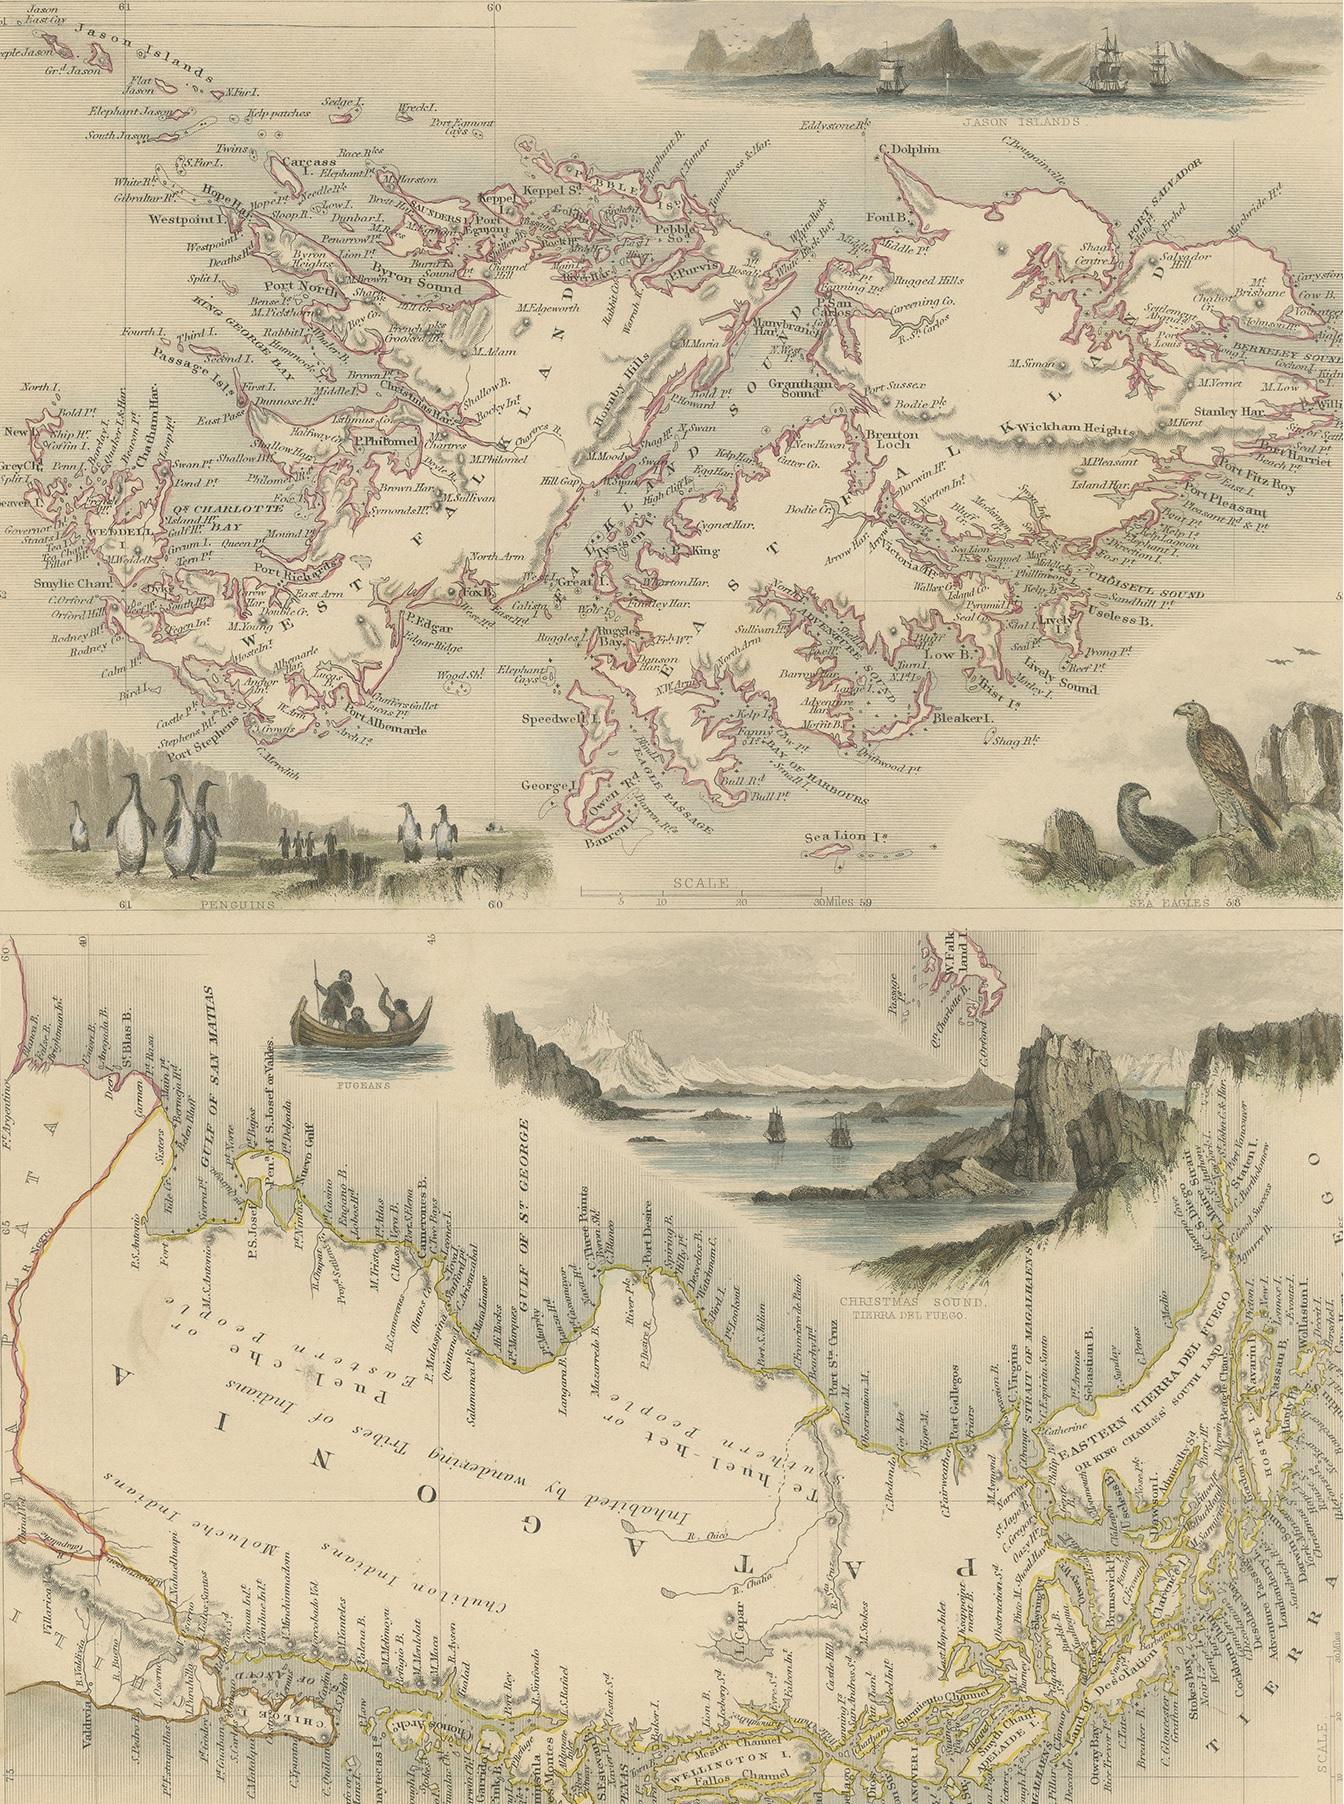 Antique map titled 'Falkland Islands and Patagonia'. Decorative and detailed map of Patagonia and the Falkland Islands. Vignettes of the Jason Islands, Sea Eagles, Penguins, Fugeans, and Christmas Sound.